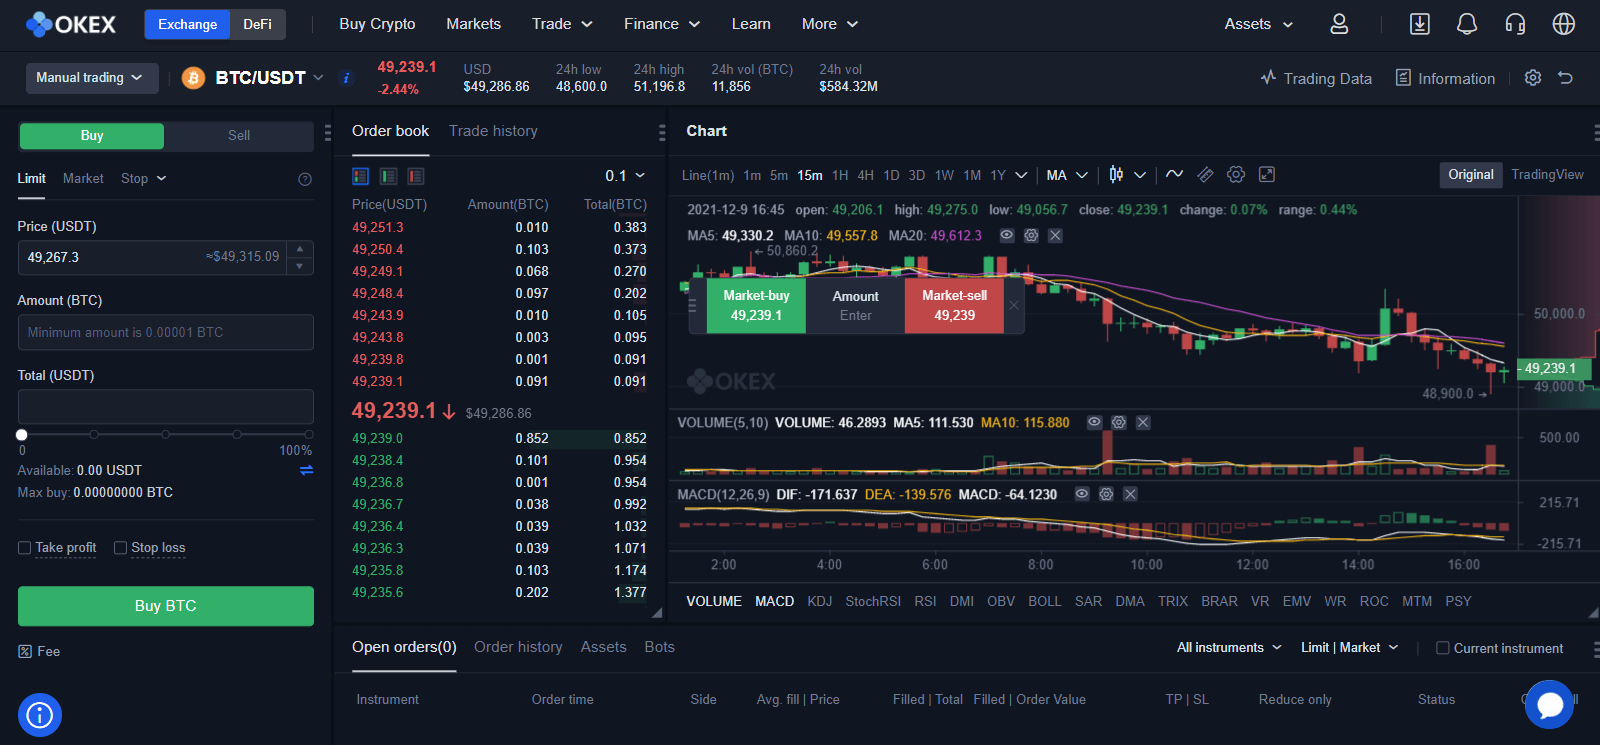 How to Trade Crypto and Withdraw from OKEx